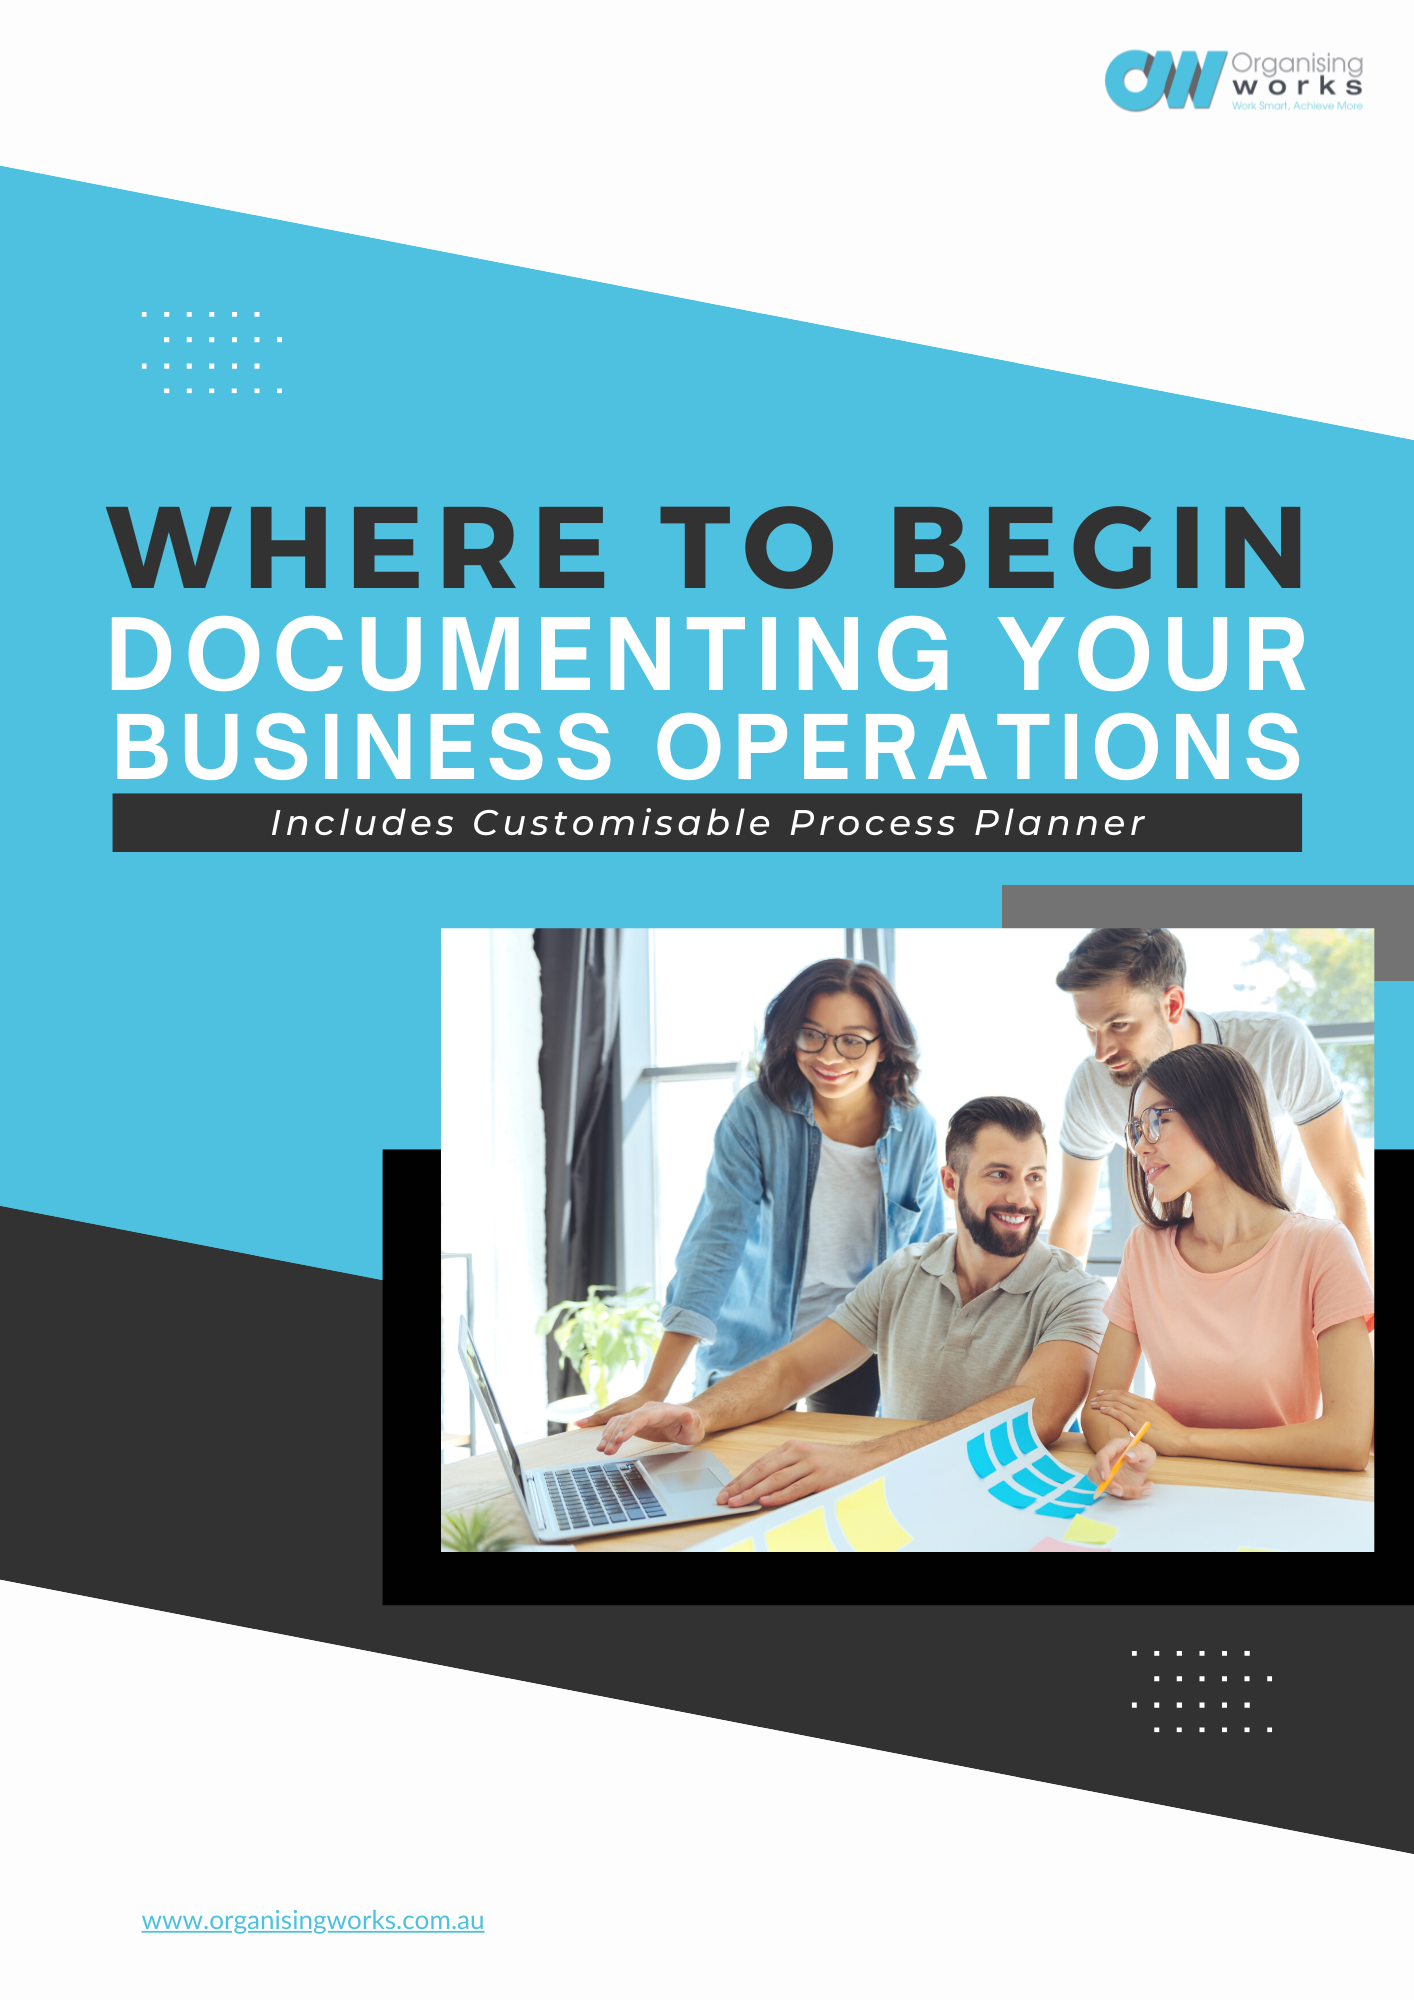 Where to Begin Documenting Your Business Operations